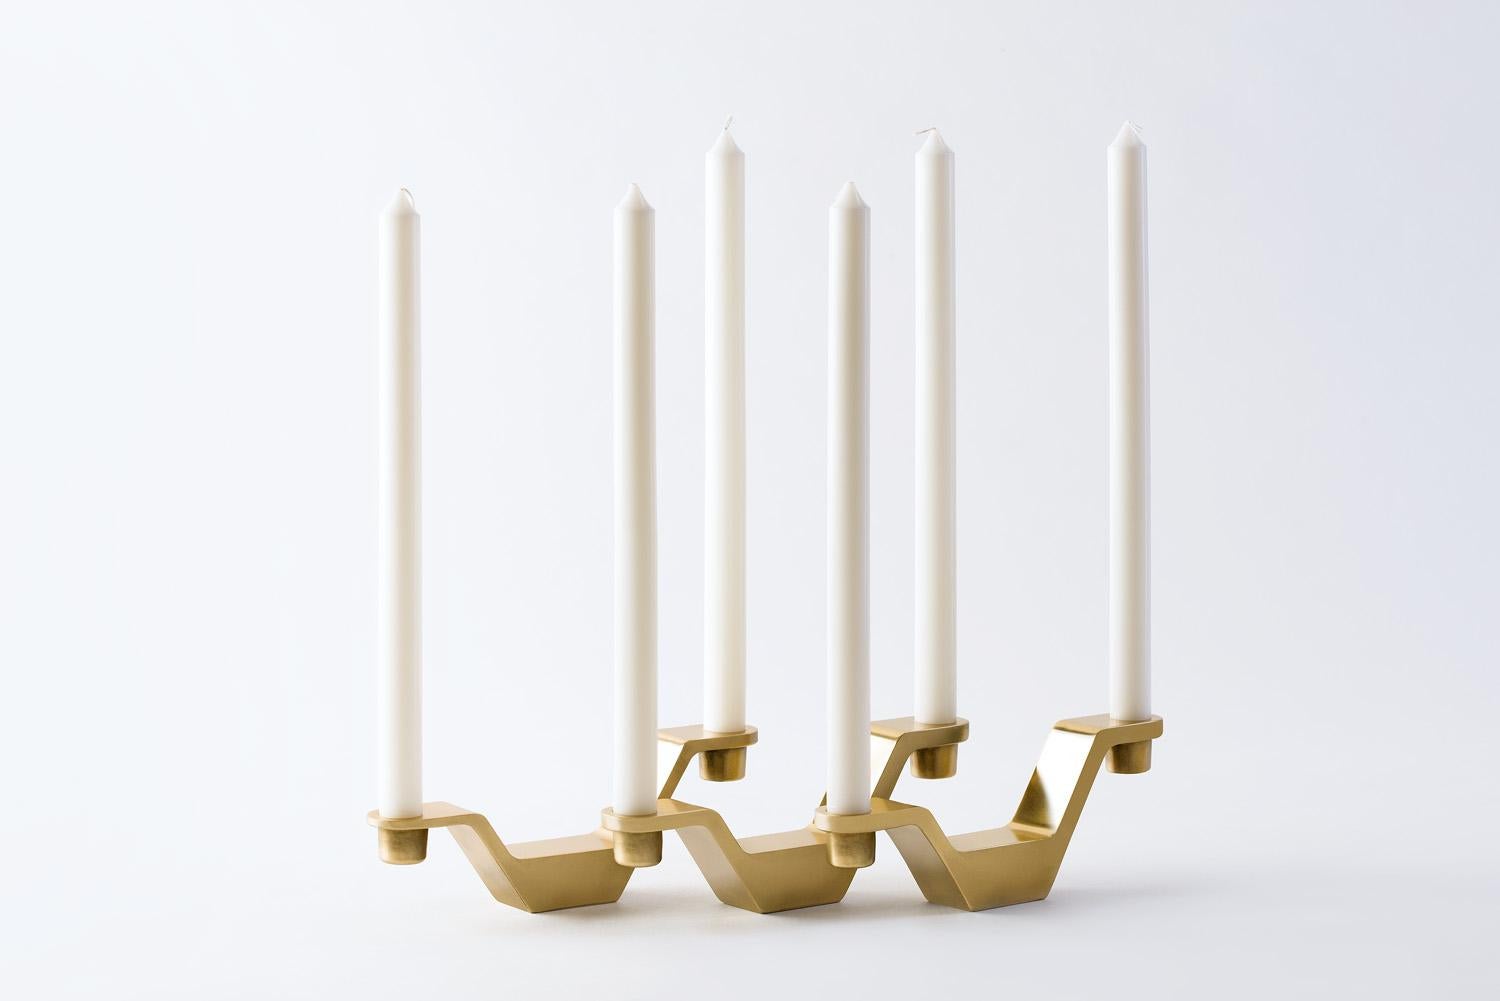 Cleo Candle Holder is designed by London based designer duo PearsonLloyd for GAIA&GINO, consisting of a brass handmade candleholder with two arms. Pearson Lloyd  implemented the same engineering principles to candle holders they apply to aircraft